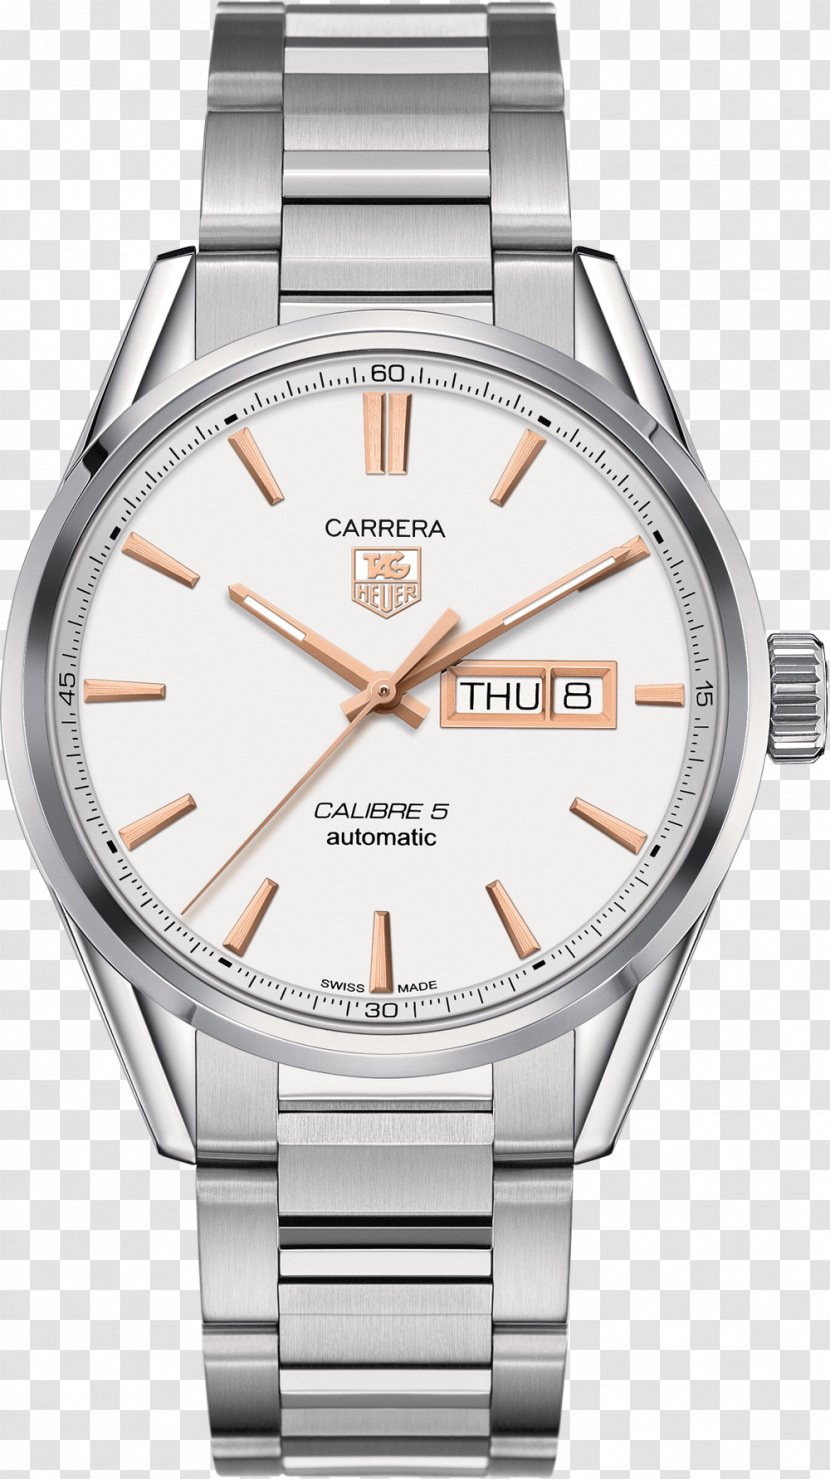 TAG Heuer Carrera Calibre 5 Day-Date Automatic Watch - Chronograph Transparent PNG